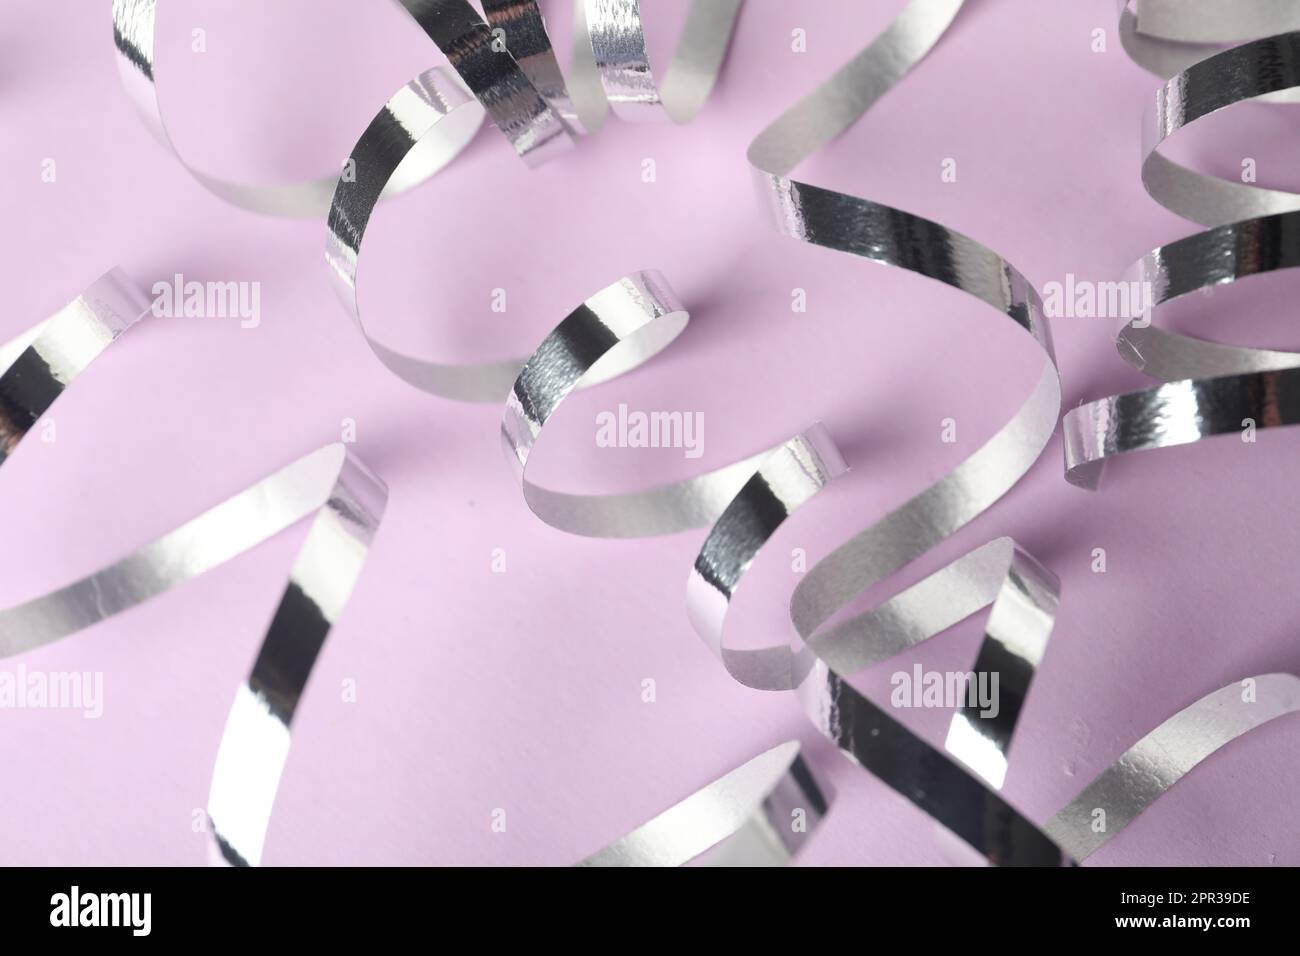 Silver Streamers Background Stock Photo 1037165905